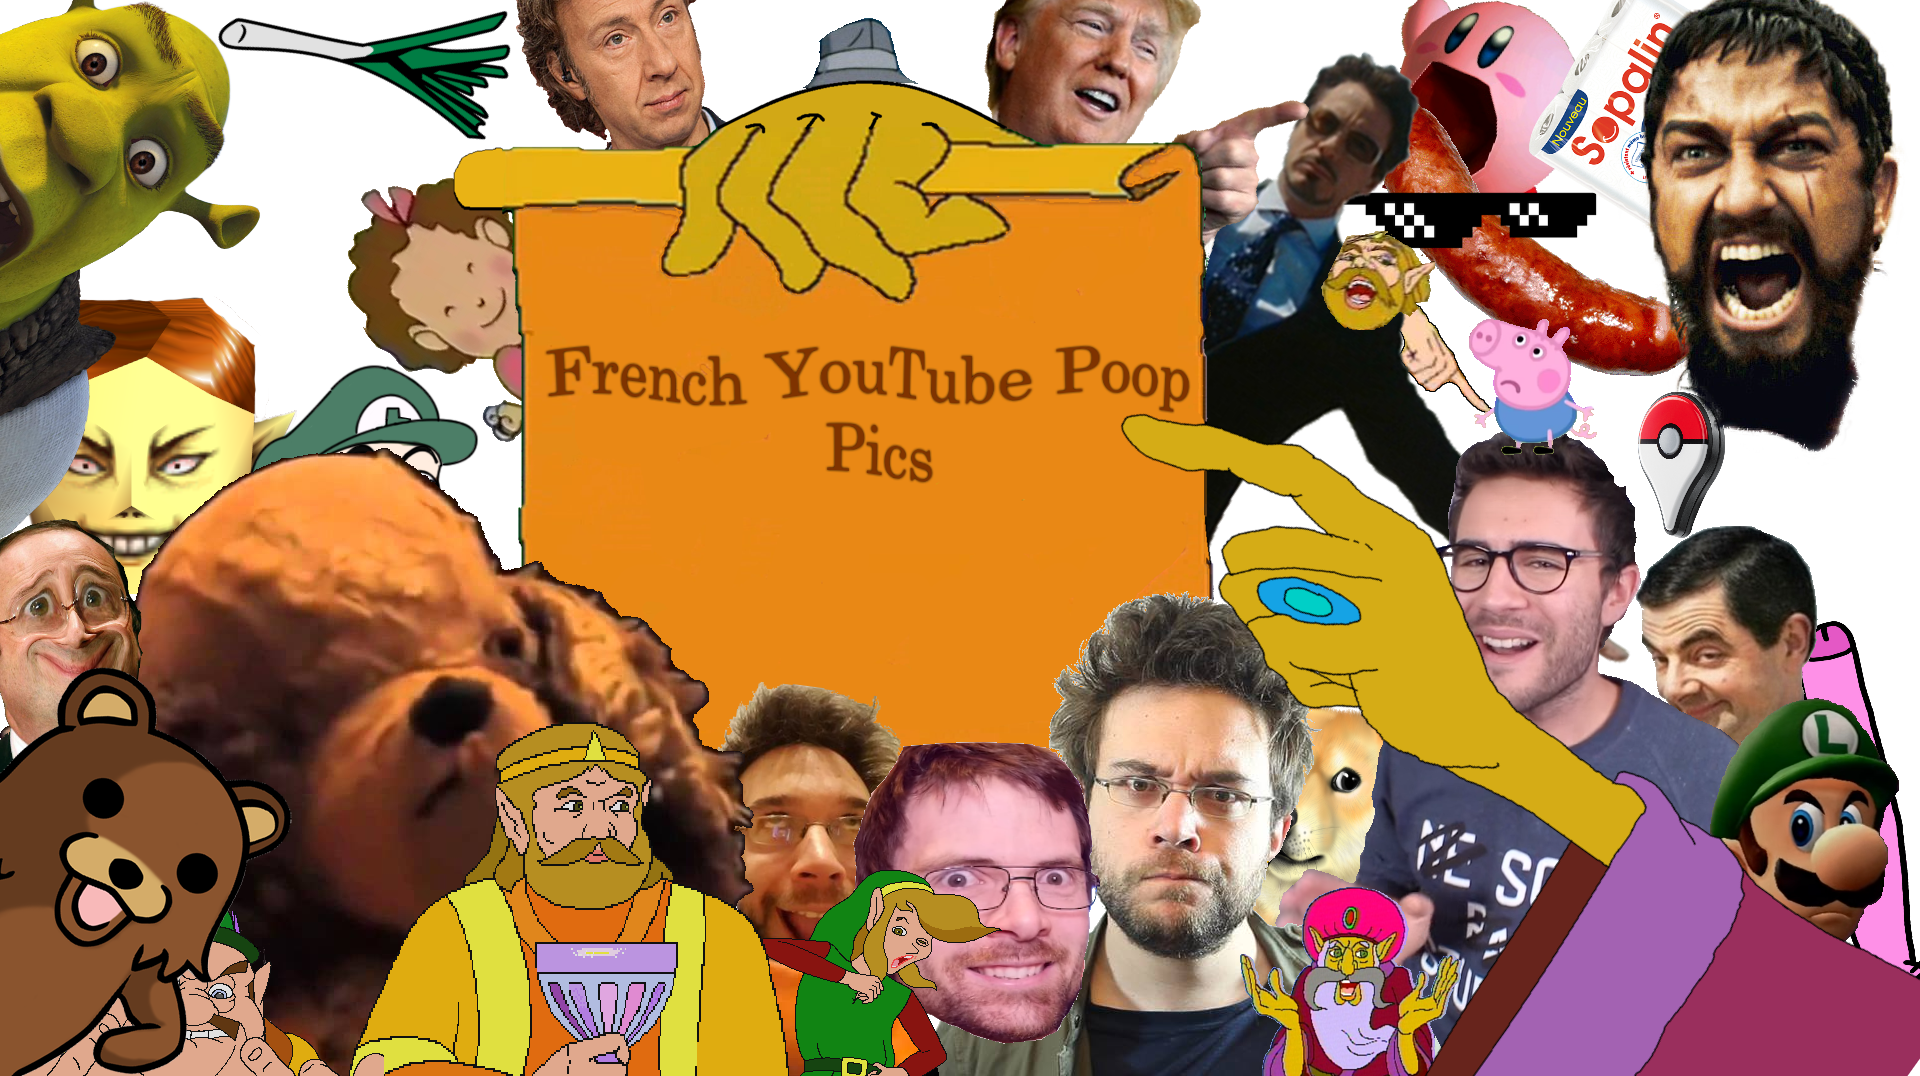 French YouTube Poop Pics